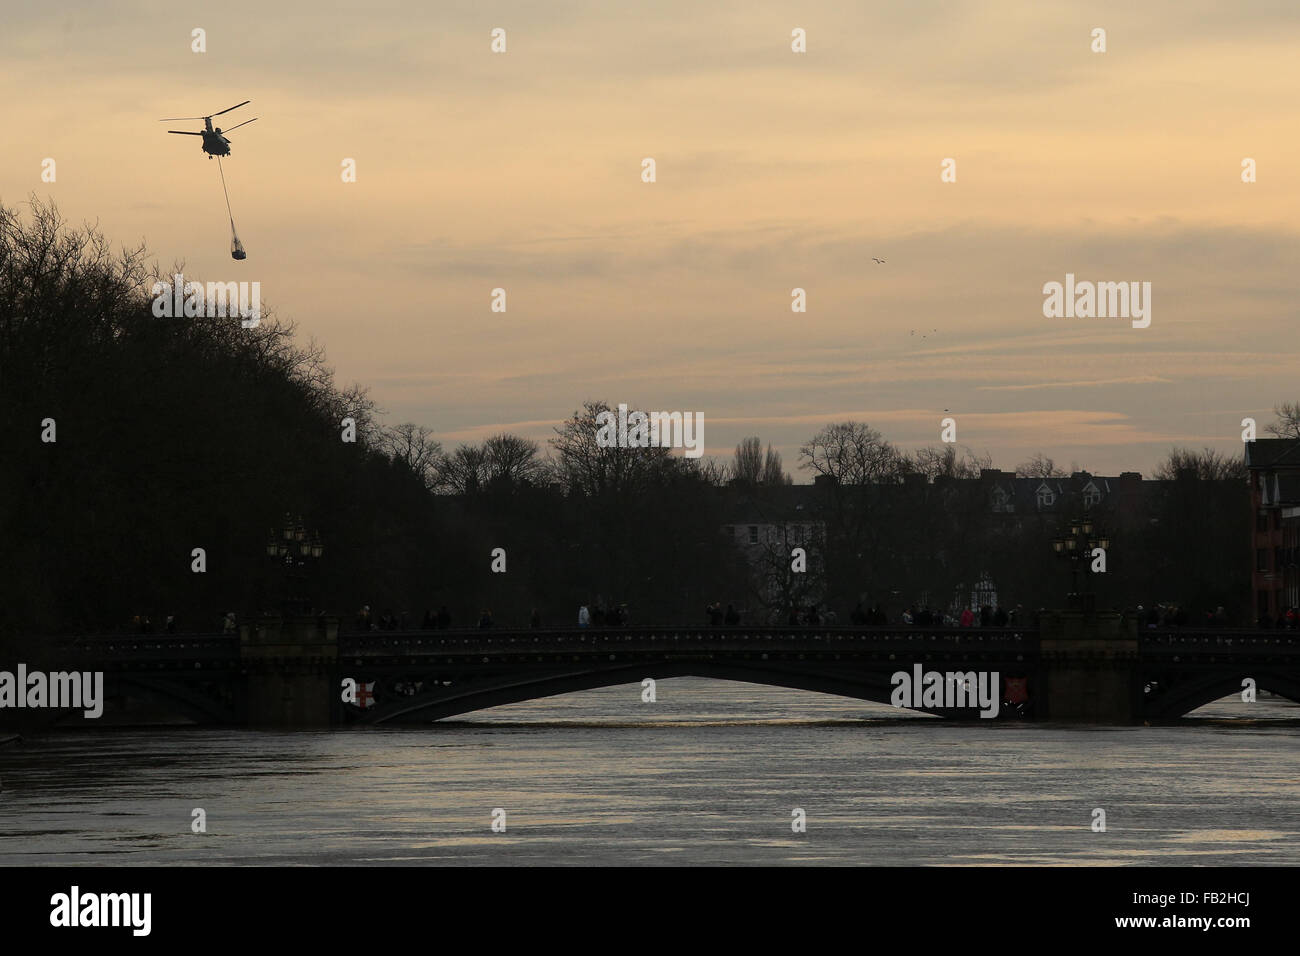 A military helicopter delivers supplies to the flood ravaged city of York, North Yorkshire, UK. Stock Photo